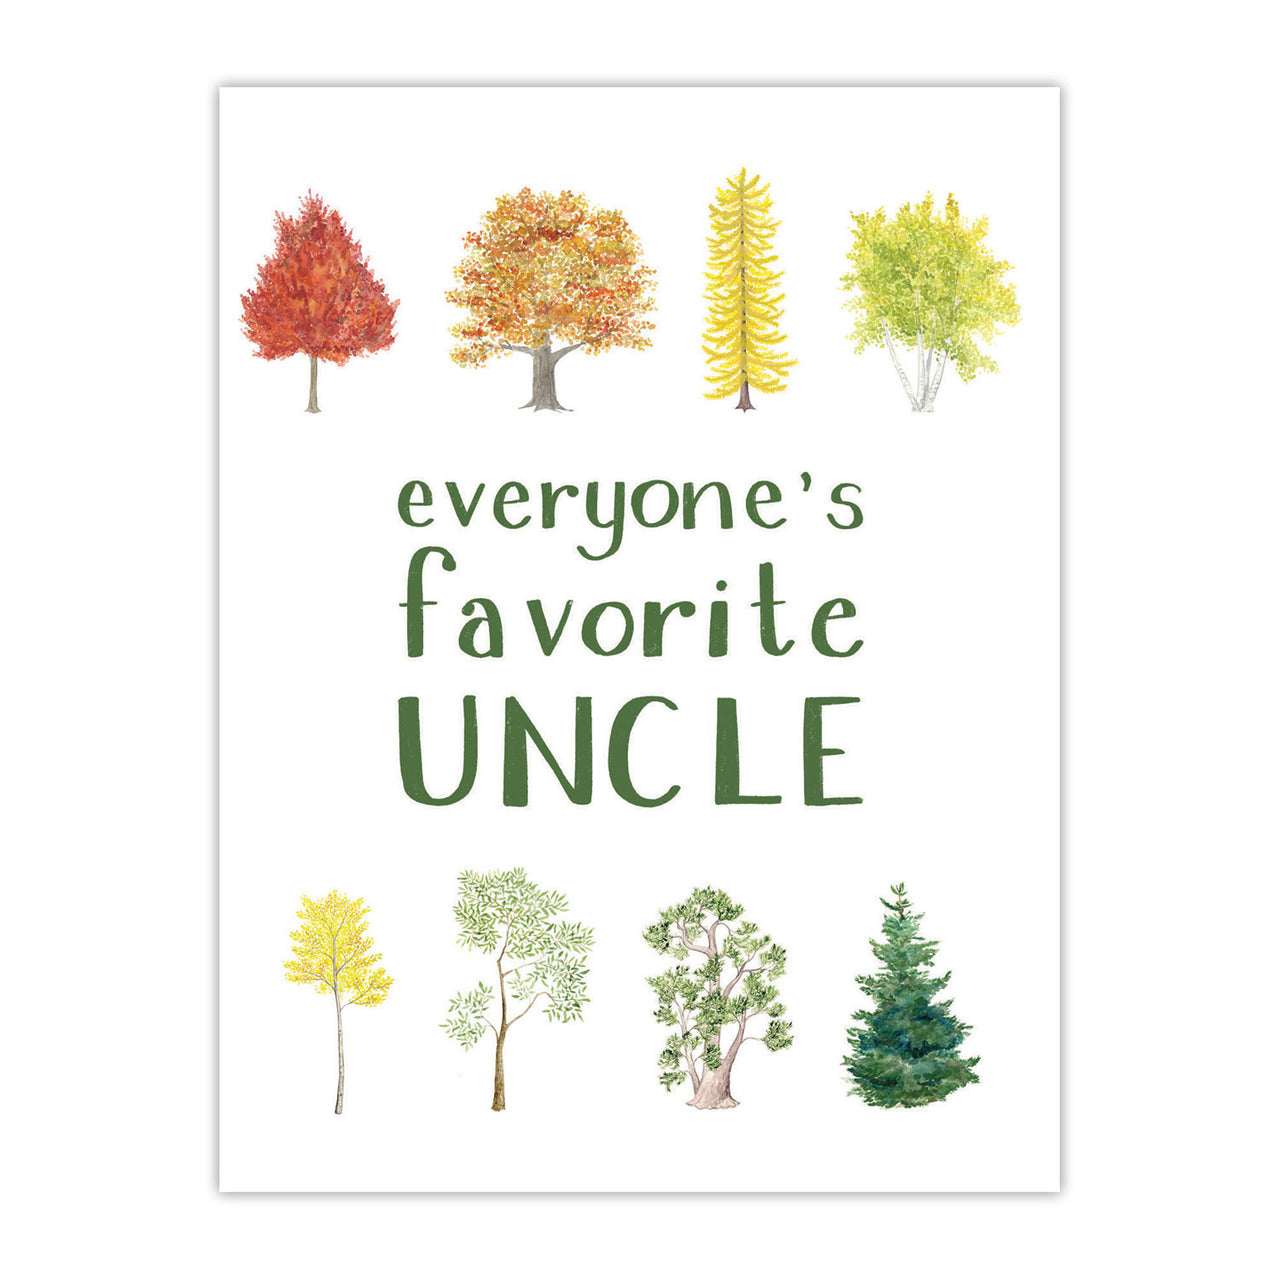 Everyone's Favorite Uncle Card - Father's Day Card